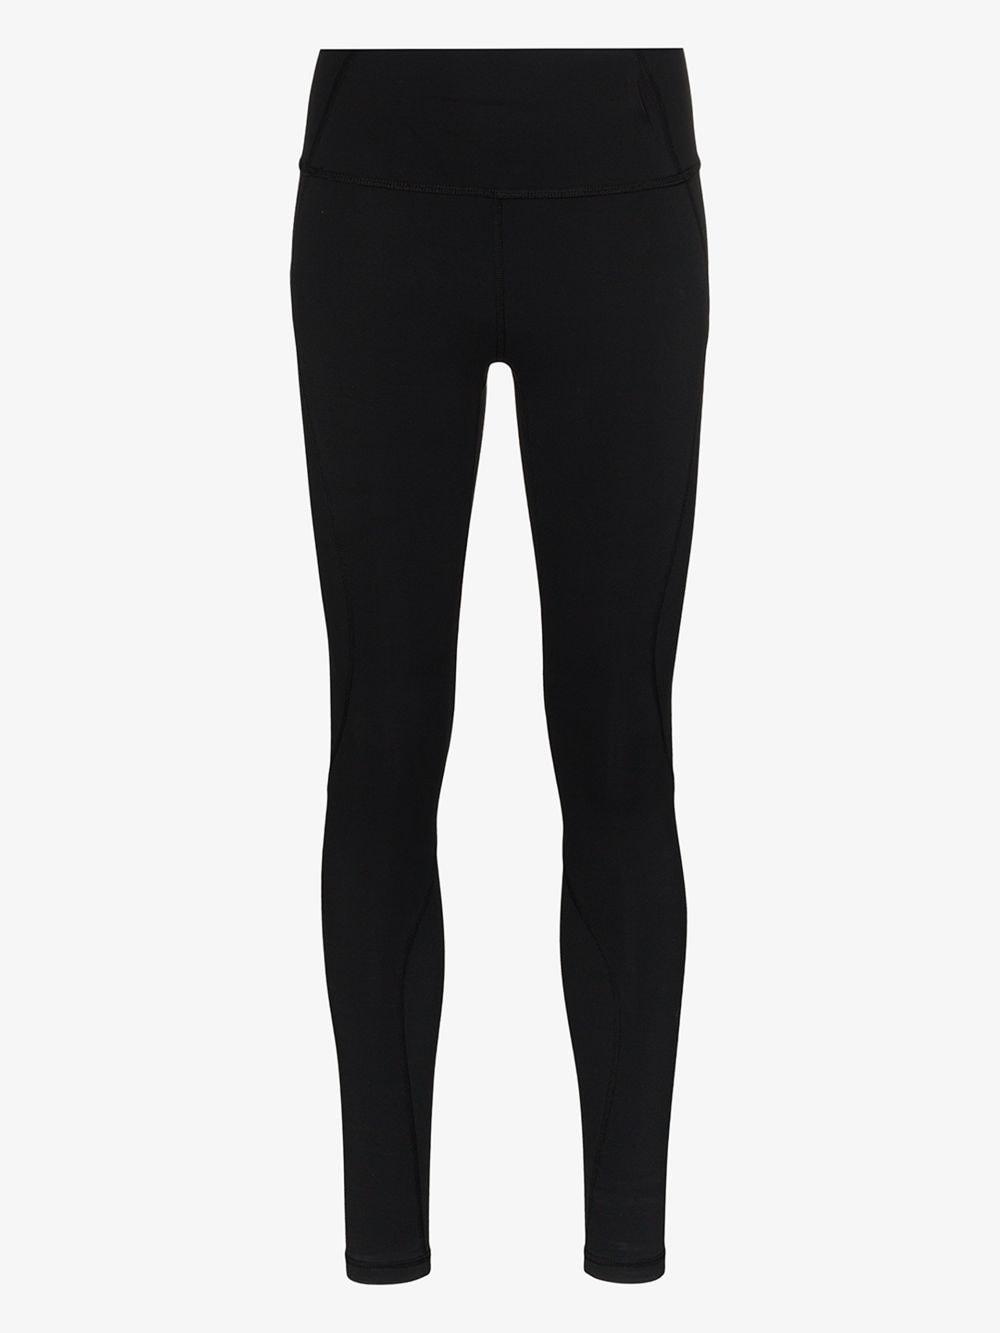 LNDR Synthetic Limitless High Waist leggings in Black - Save 24% - Lyst